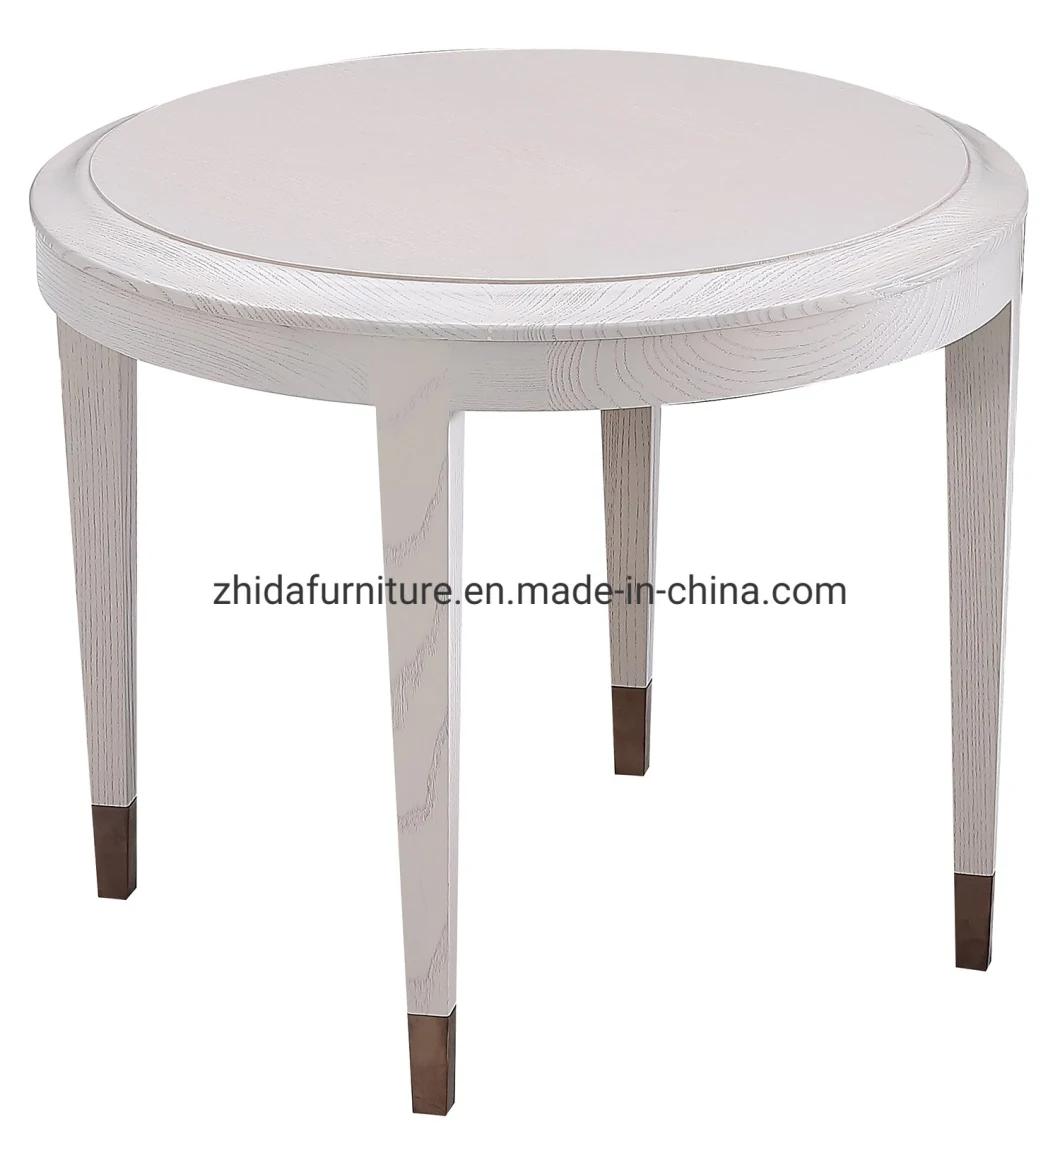 Modern Round Shape Coffee Side Table for Hotel Coffee Shop